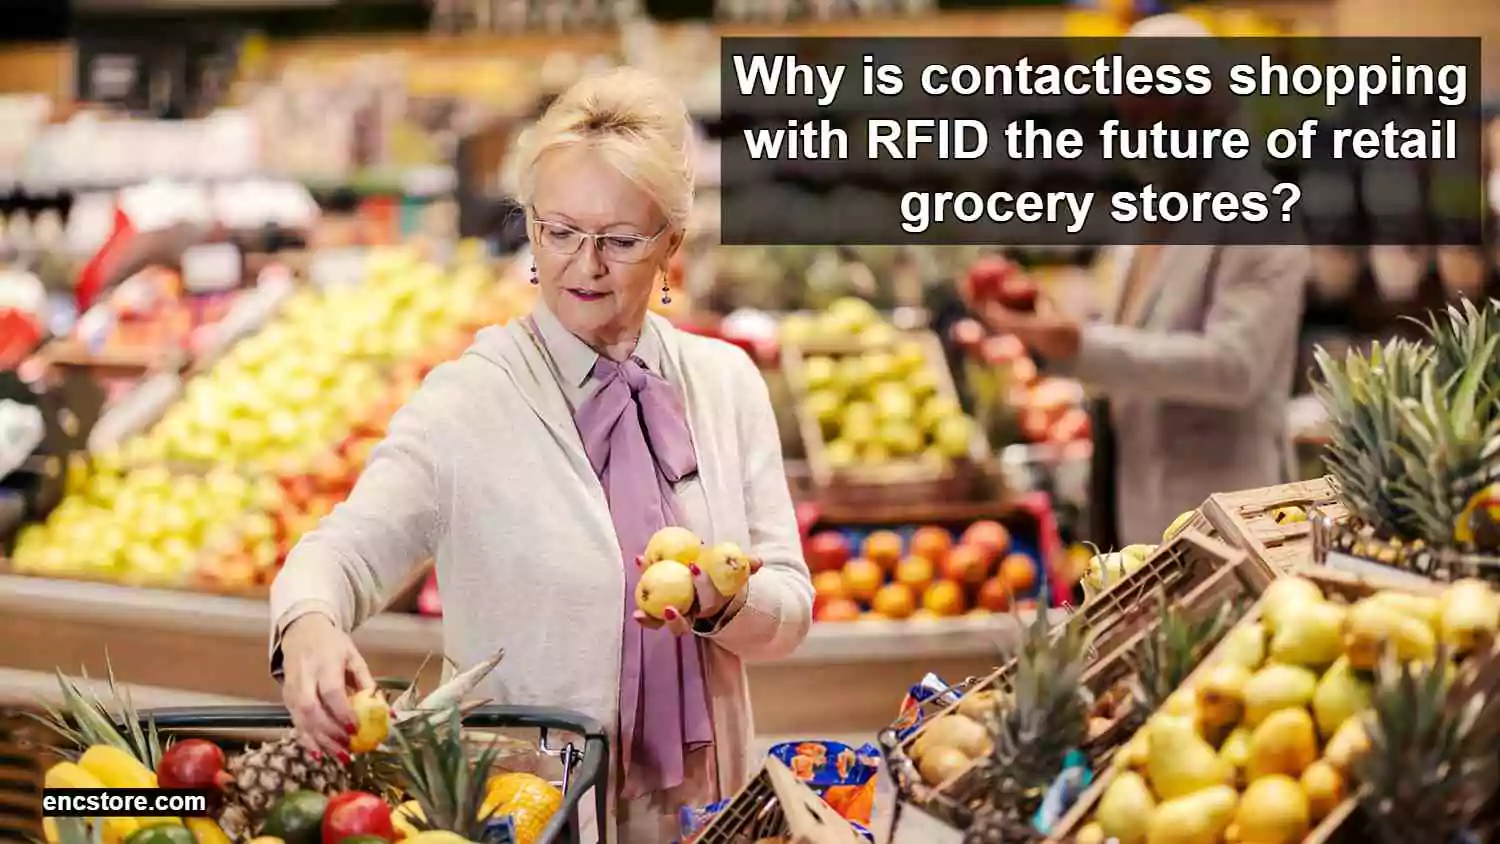 Contactless shopping with RFID